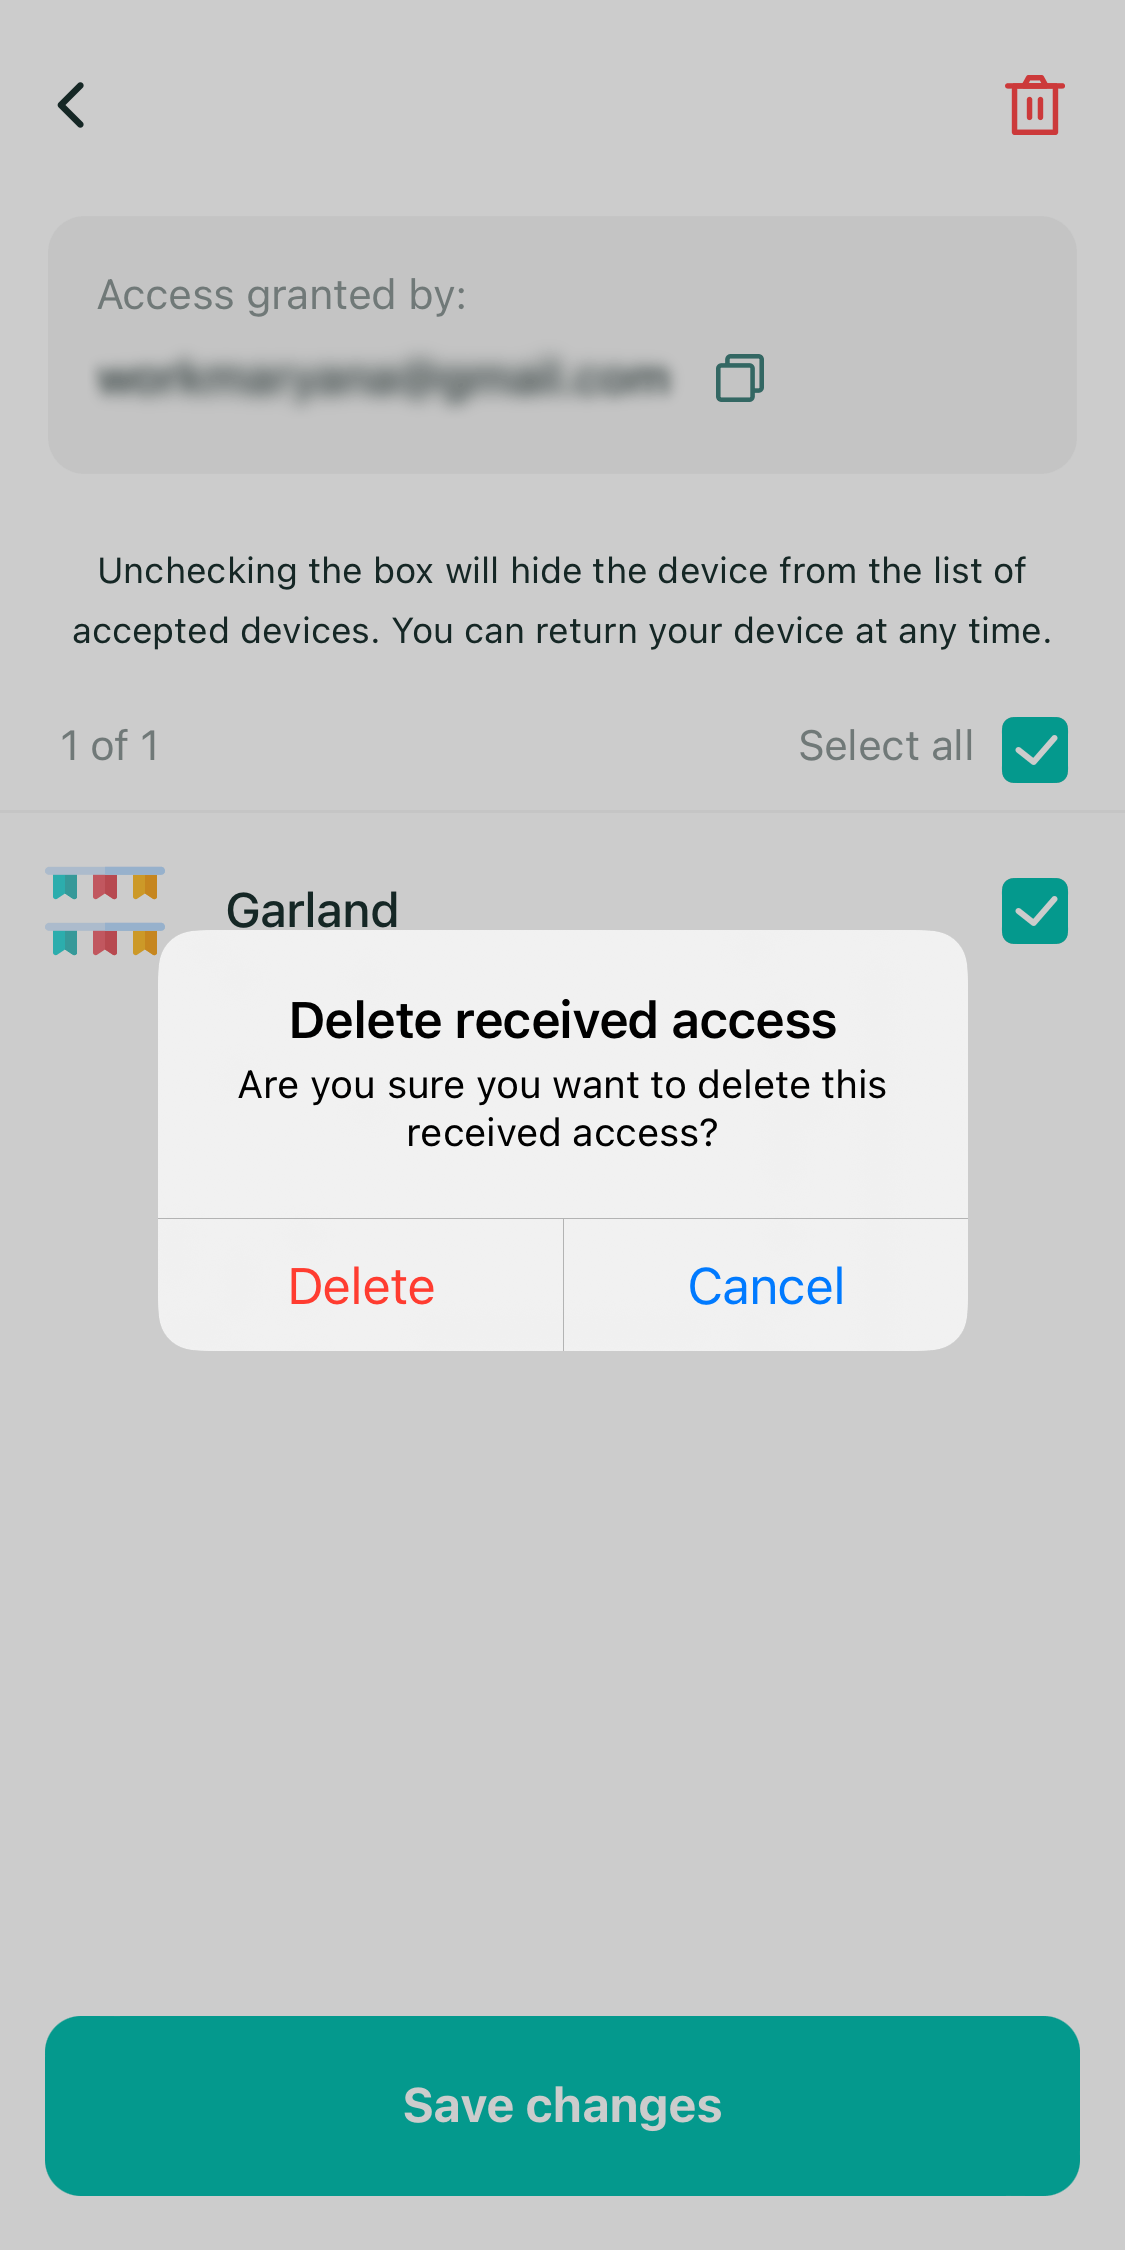 Deleting a received access